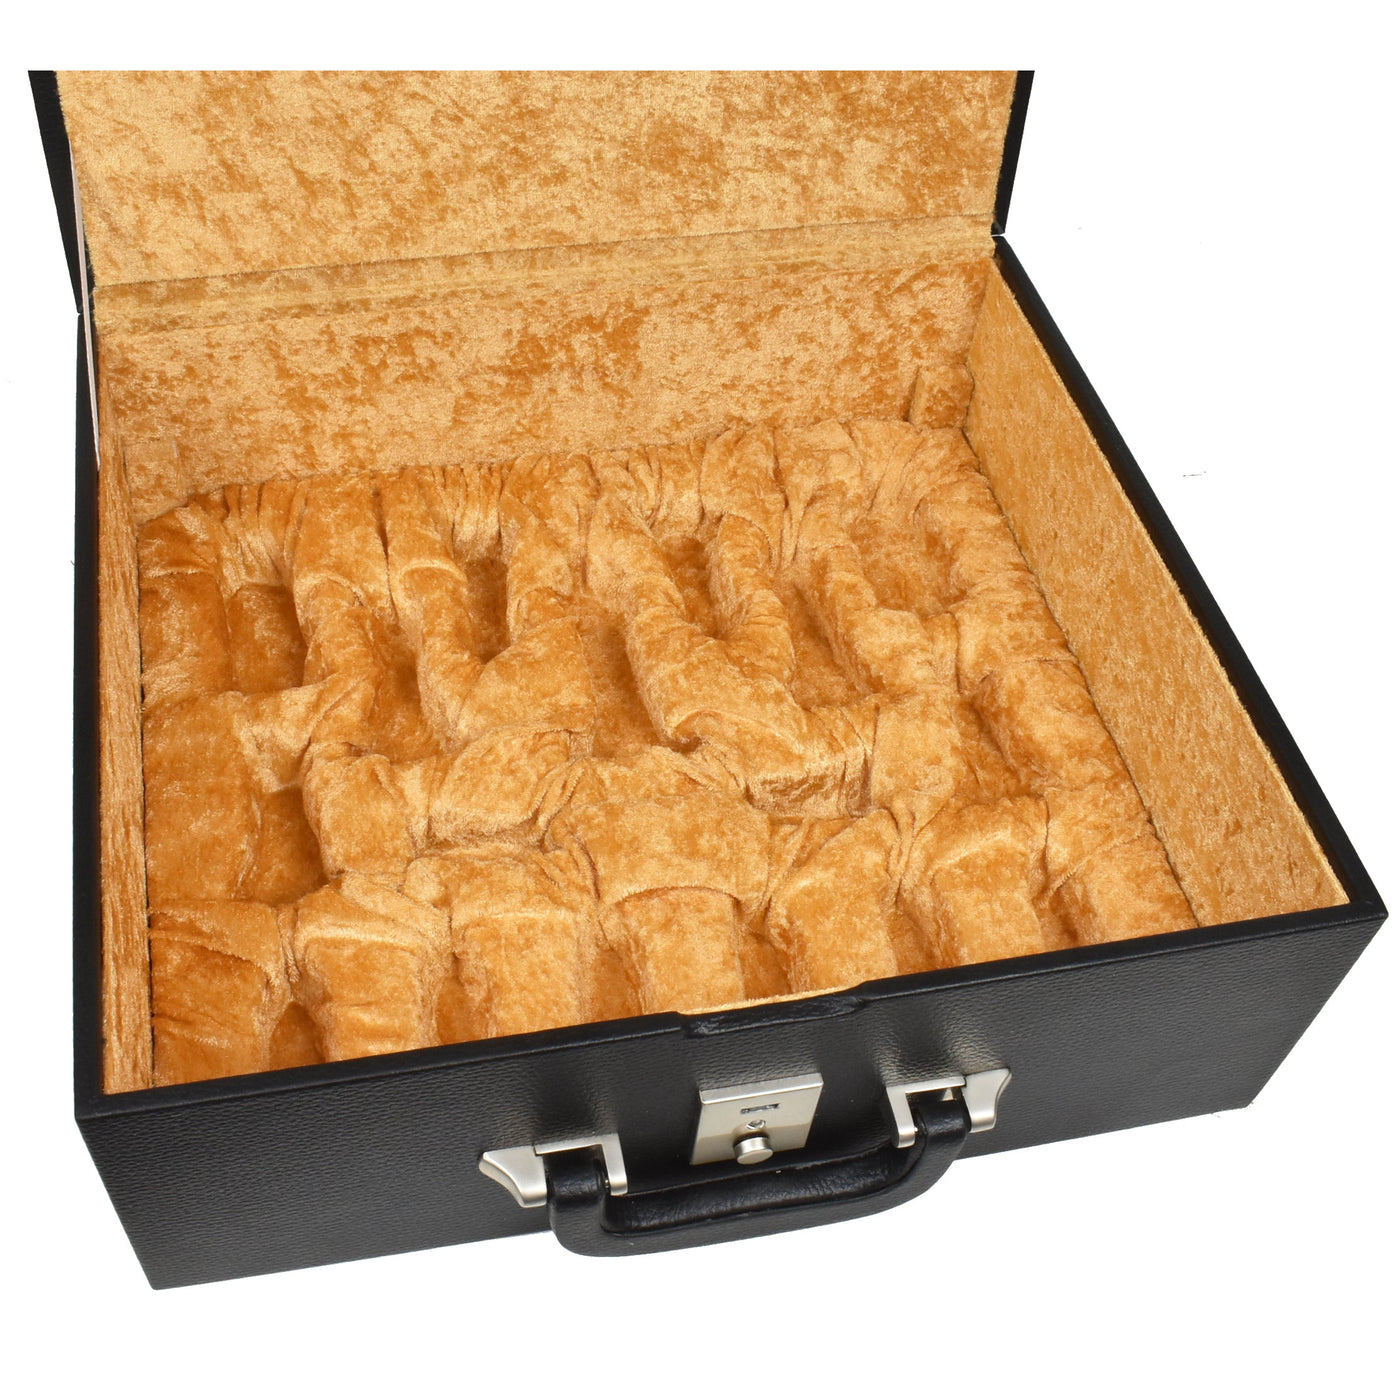 Combo of Alexandria Luxury Staunton Chess Set - Pieces in Ebony & Bud Rosewood with Board and Box